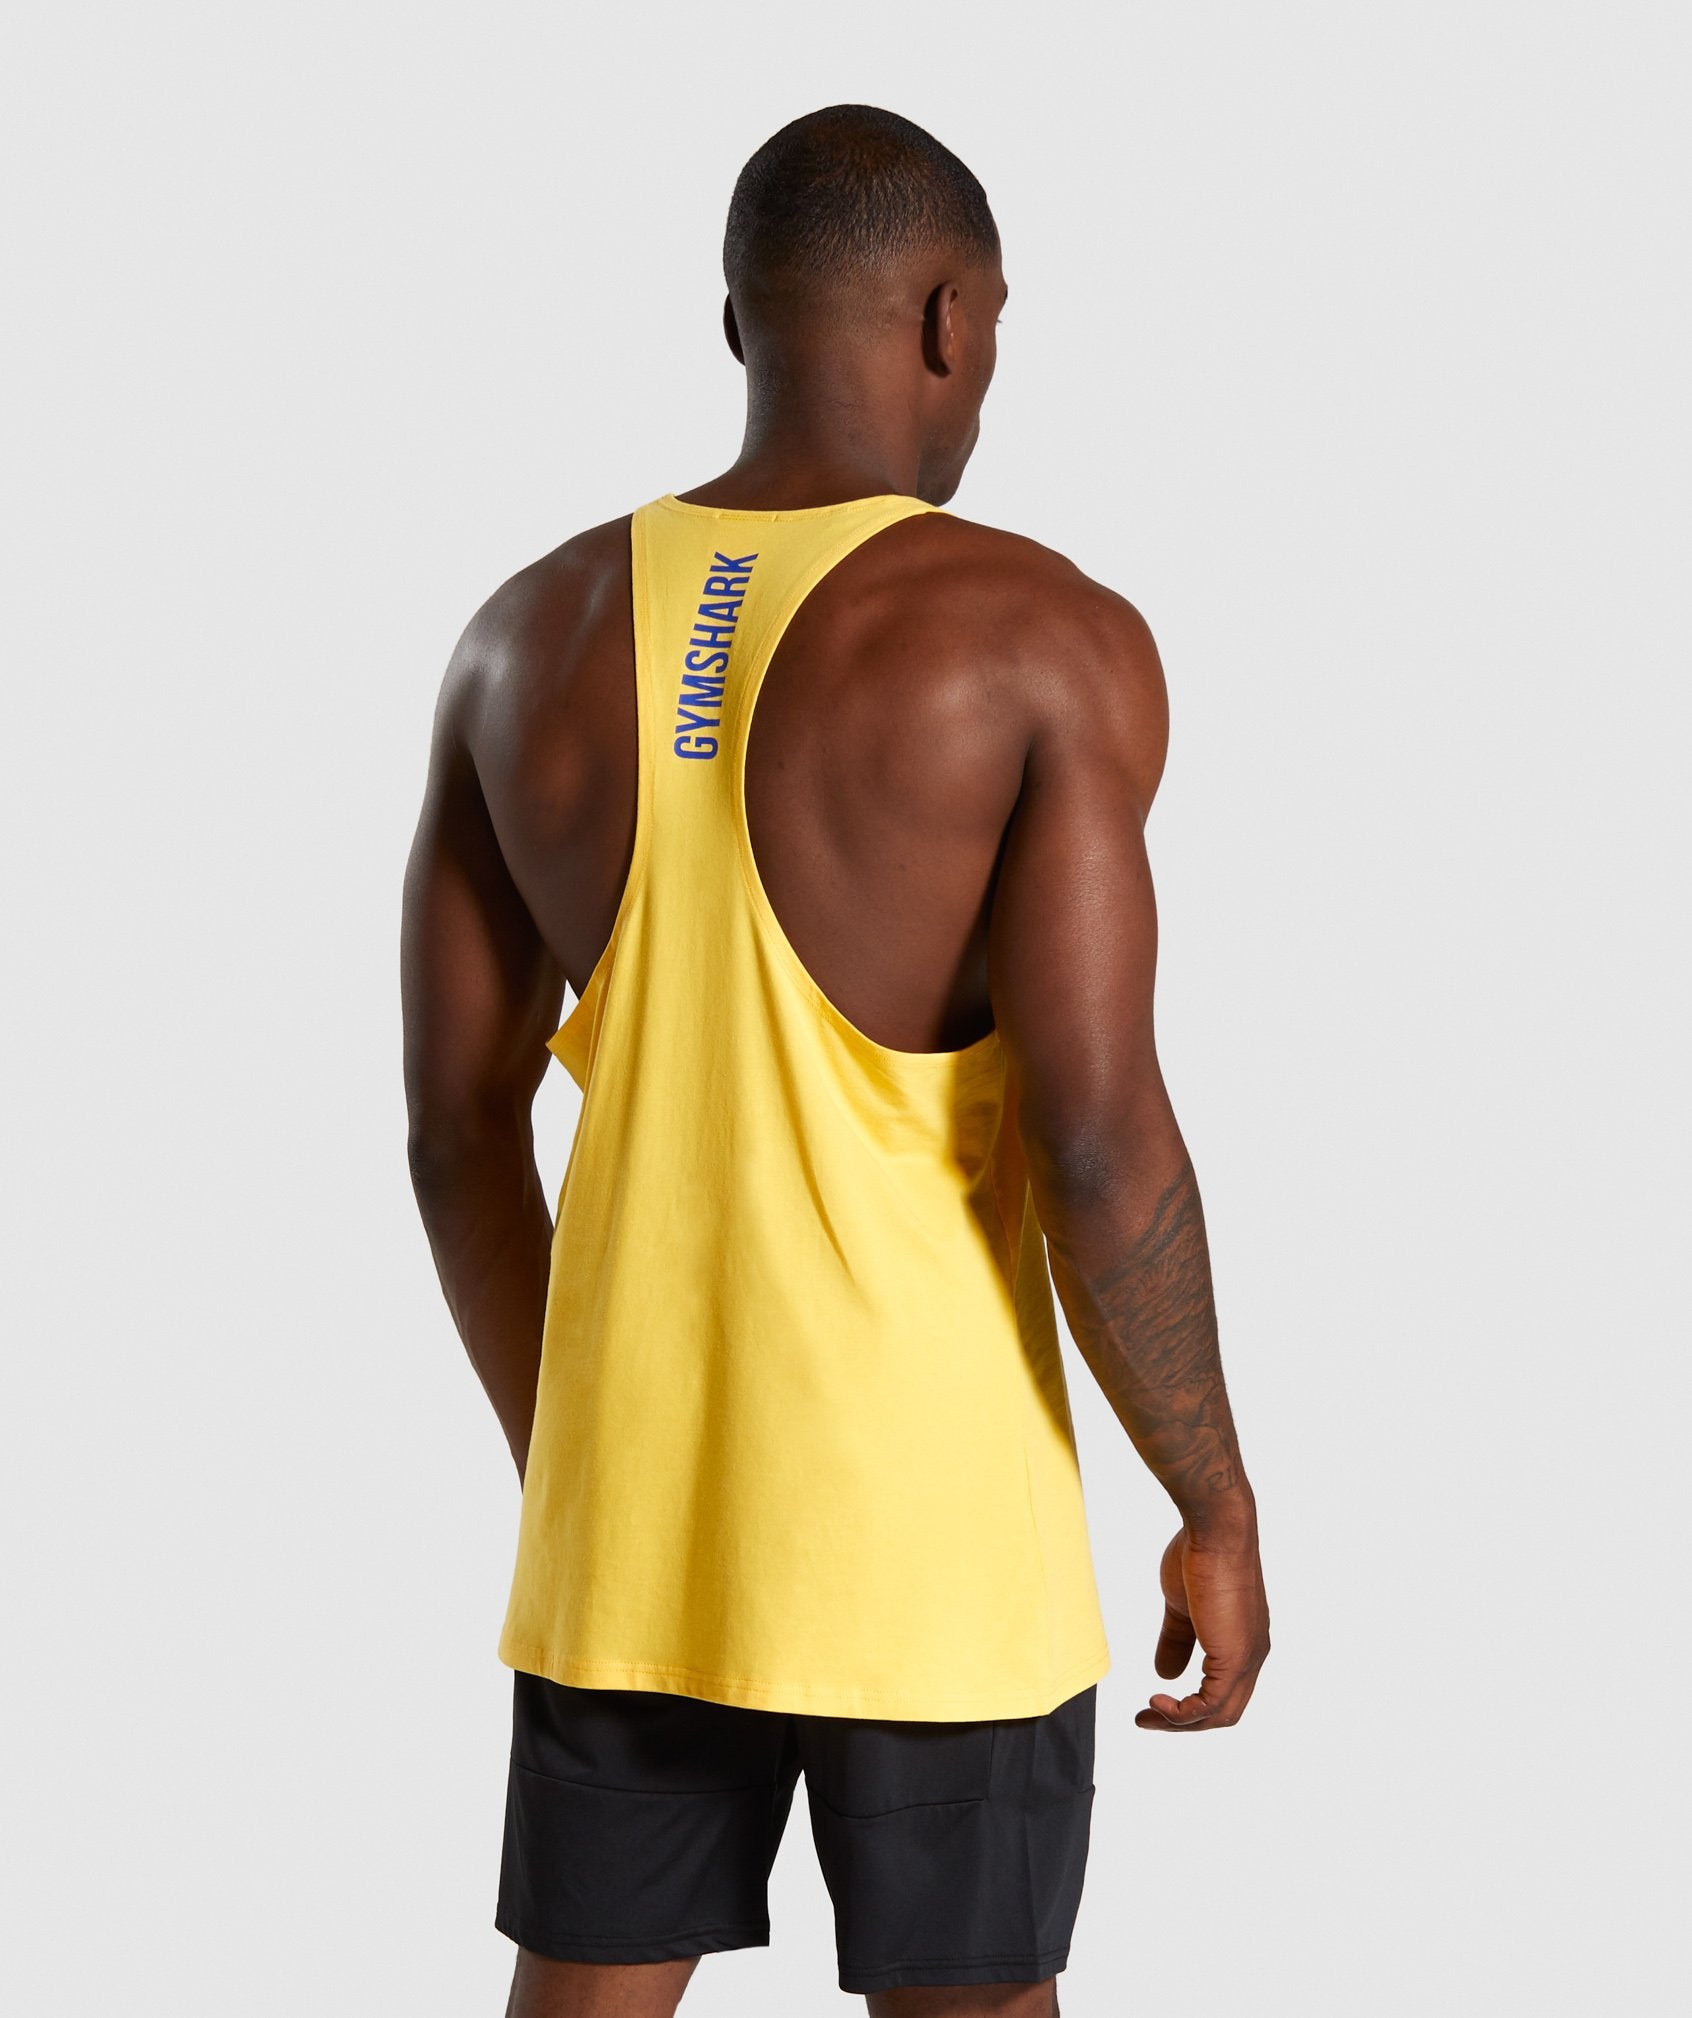 Infill Stringer in Yellow